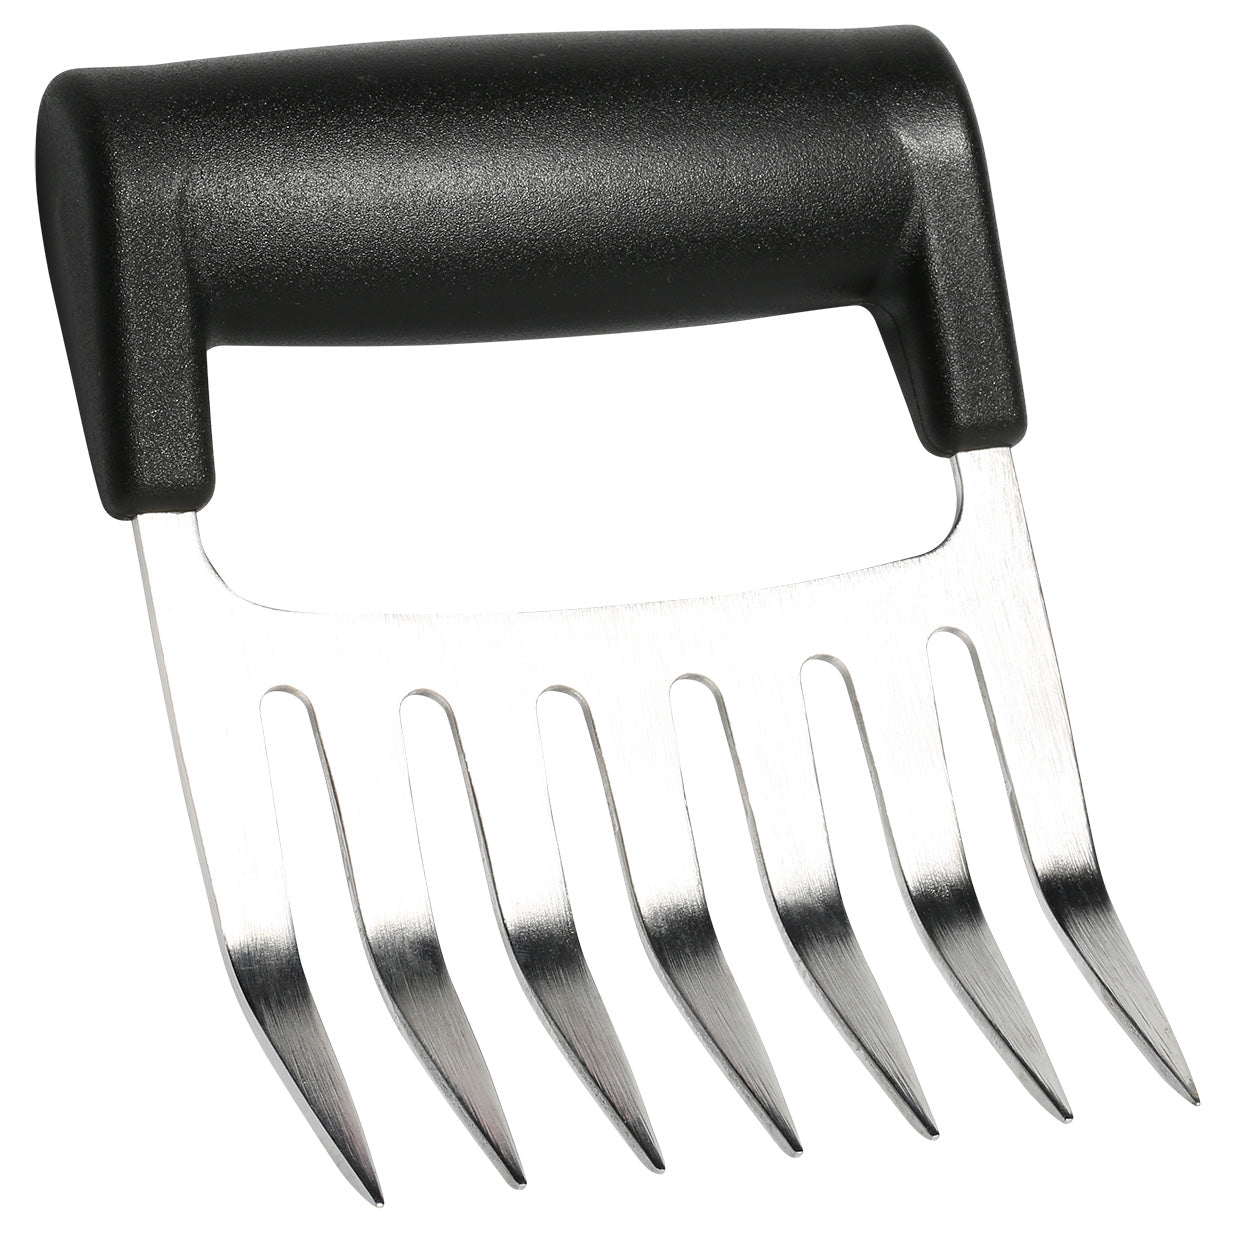 Gerior Meat Shredder Claws for Shredding Pulled Pork, Chicken - Stainless Steel BBQ Tool - Large Size